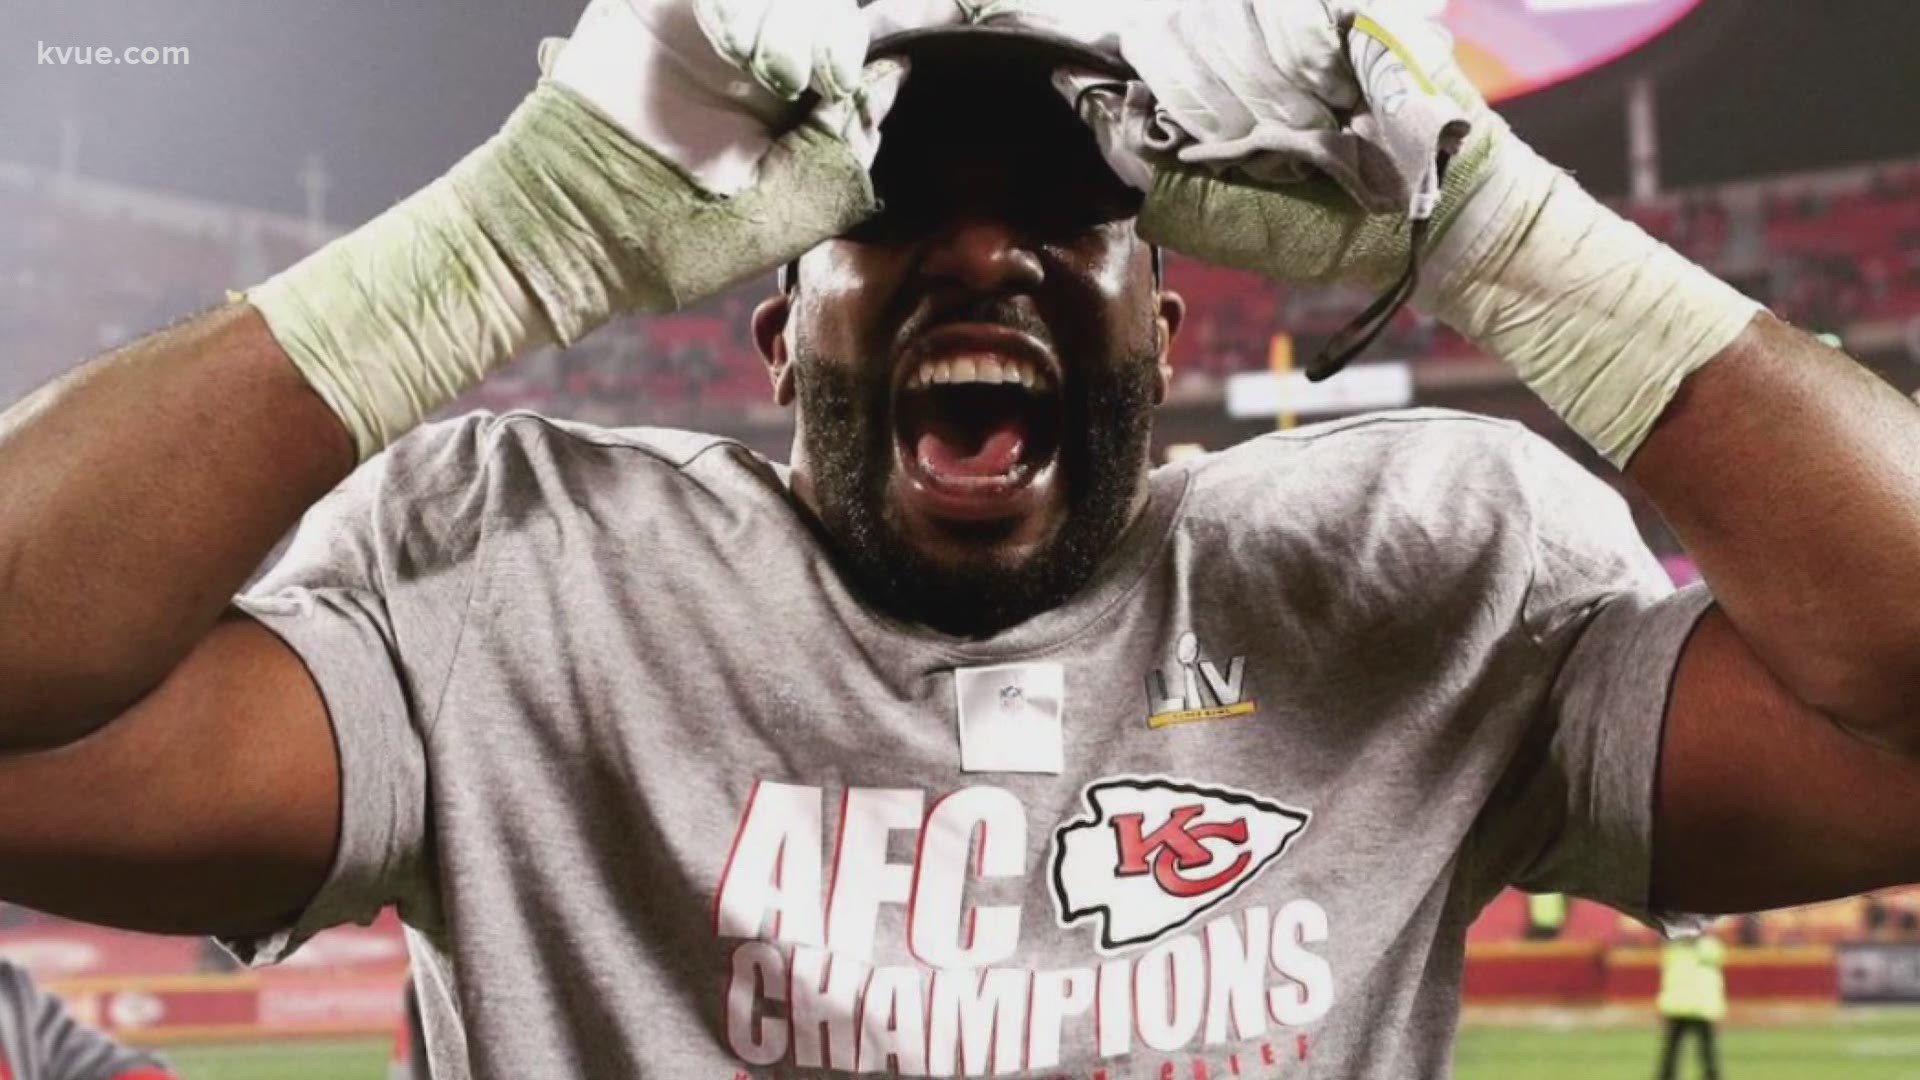 After being injured in last year's Super Bowl win, Kansas City Chiefs defensive end Alex Okafor had a long road to recover, but is now ready for his second chance.